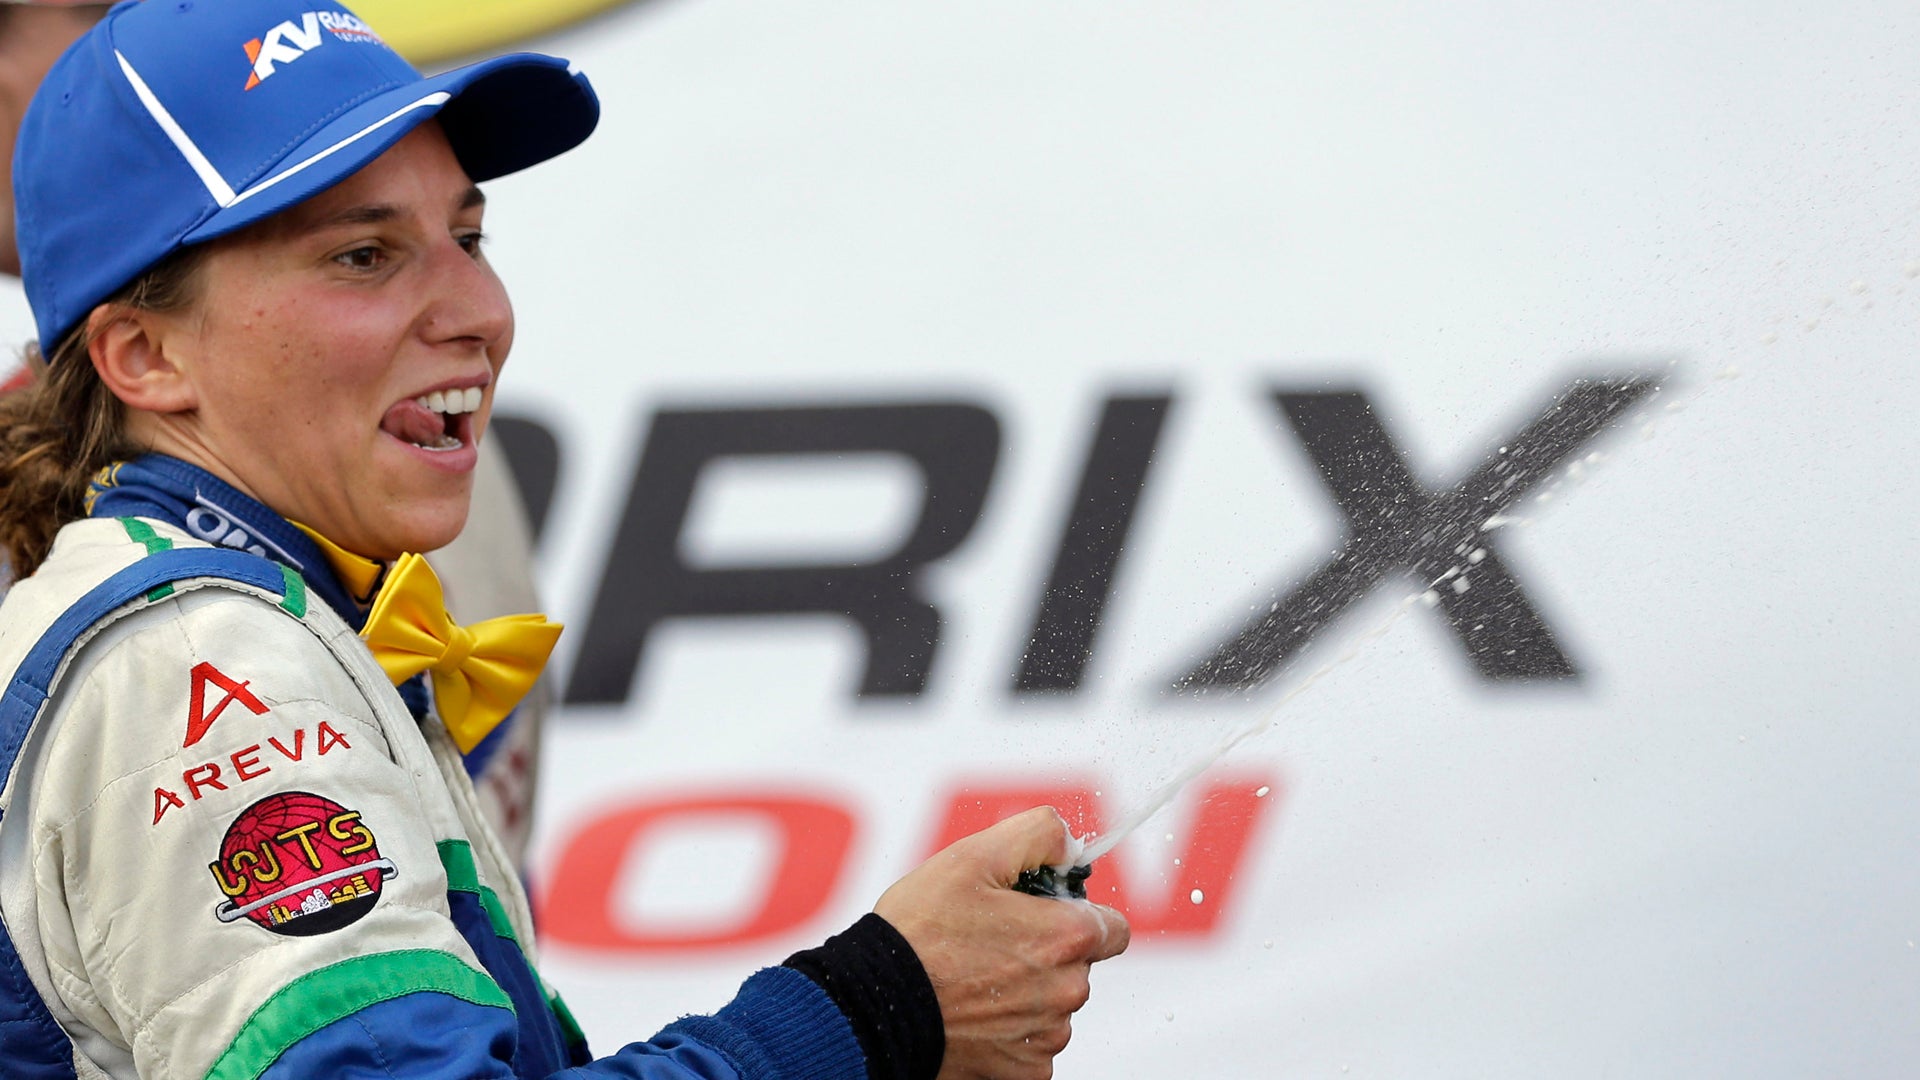 Simona de Silvestro Could Be First Female F1 Racer In 23 Years